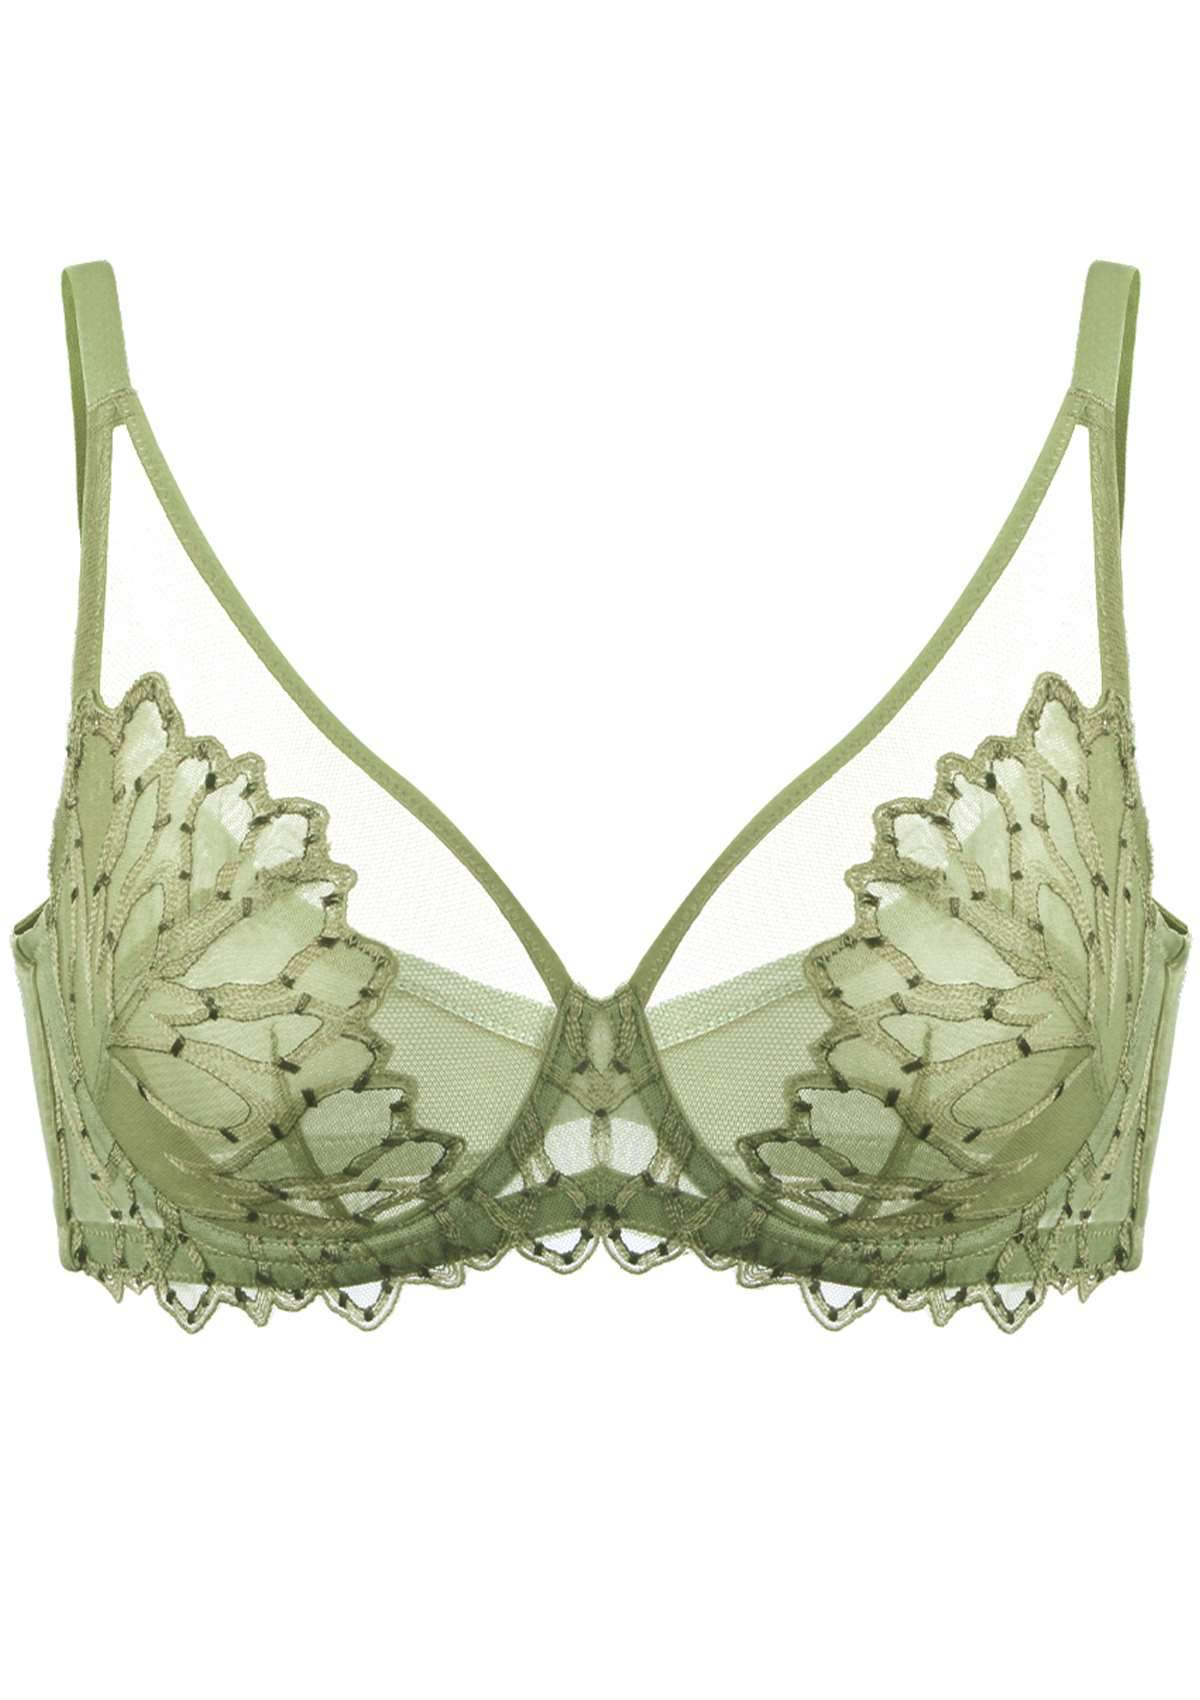 HSIA Chrysanthemum Floral Embroidered Bra: Lace Sheer Unpadded Bra - Green / 32 / D